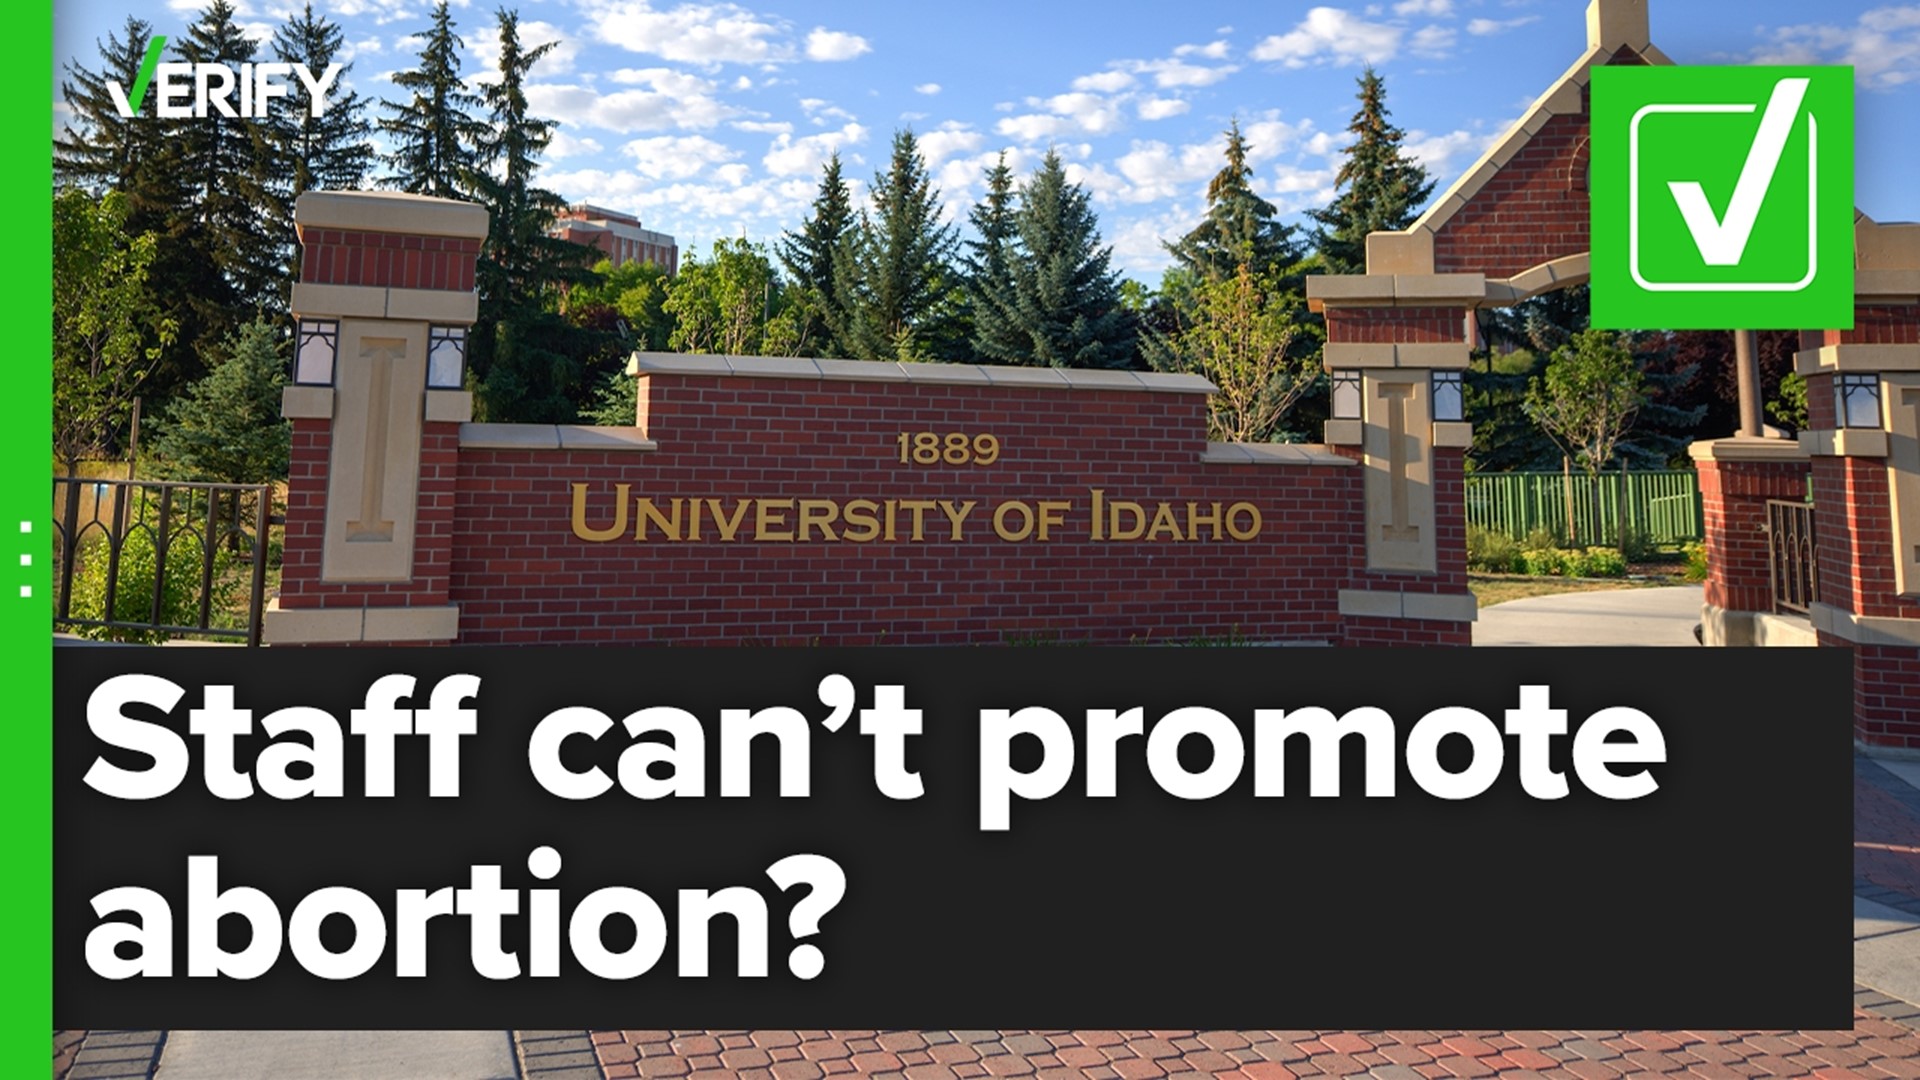 The University of Idaho is urging staff members to “remain neutral” in discussions about abortion and avoid promoting contraception in response to state laws.